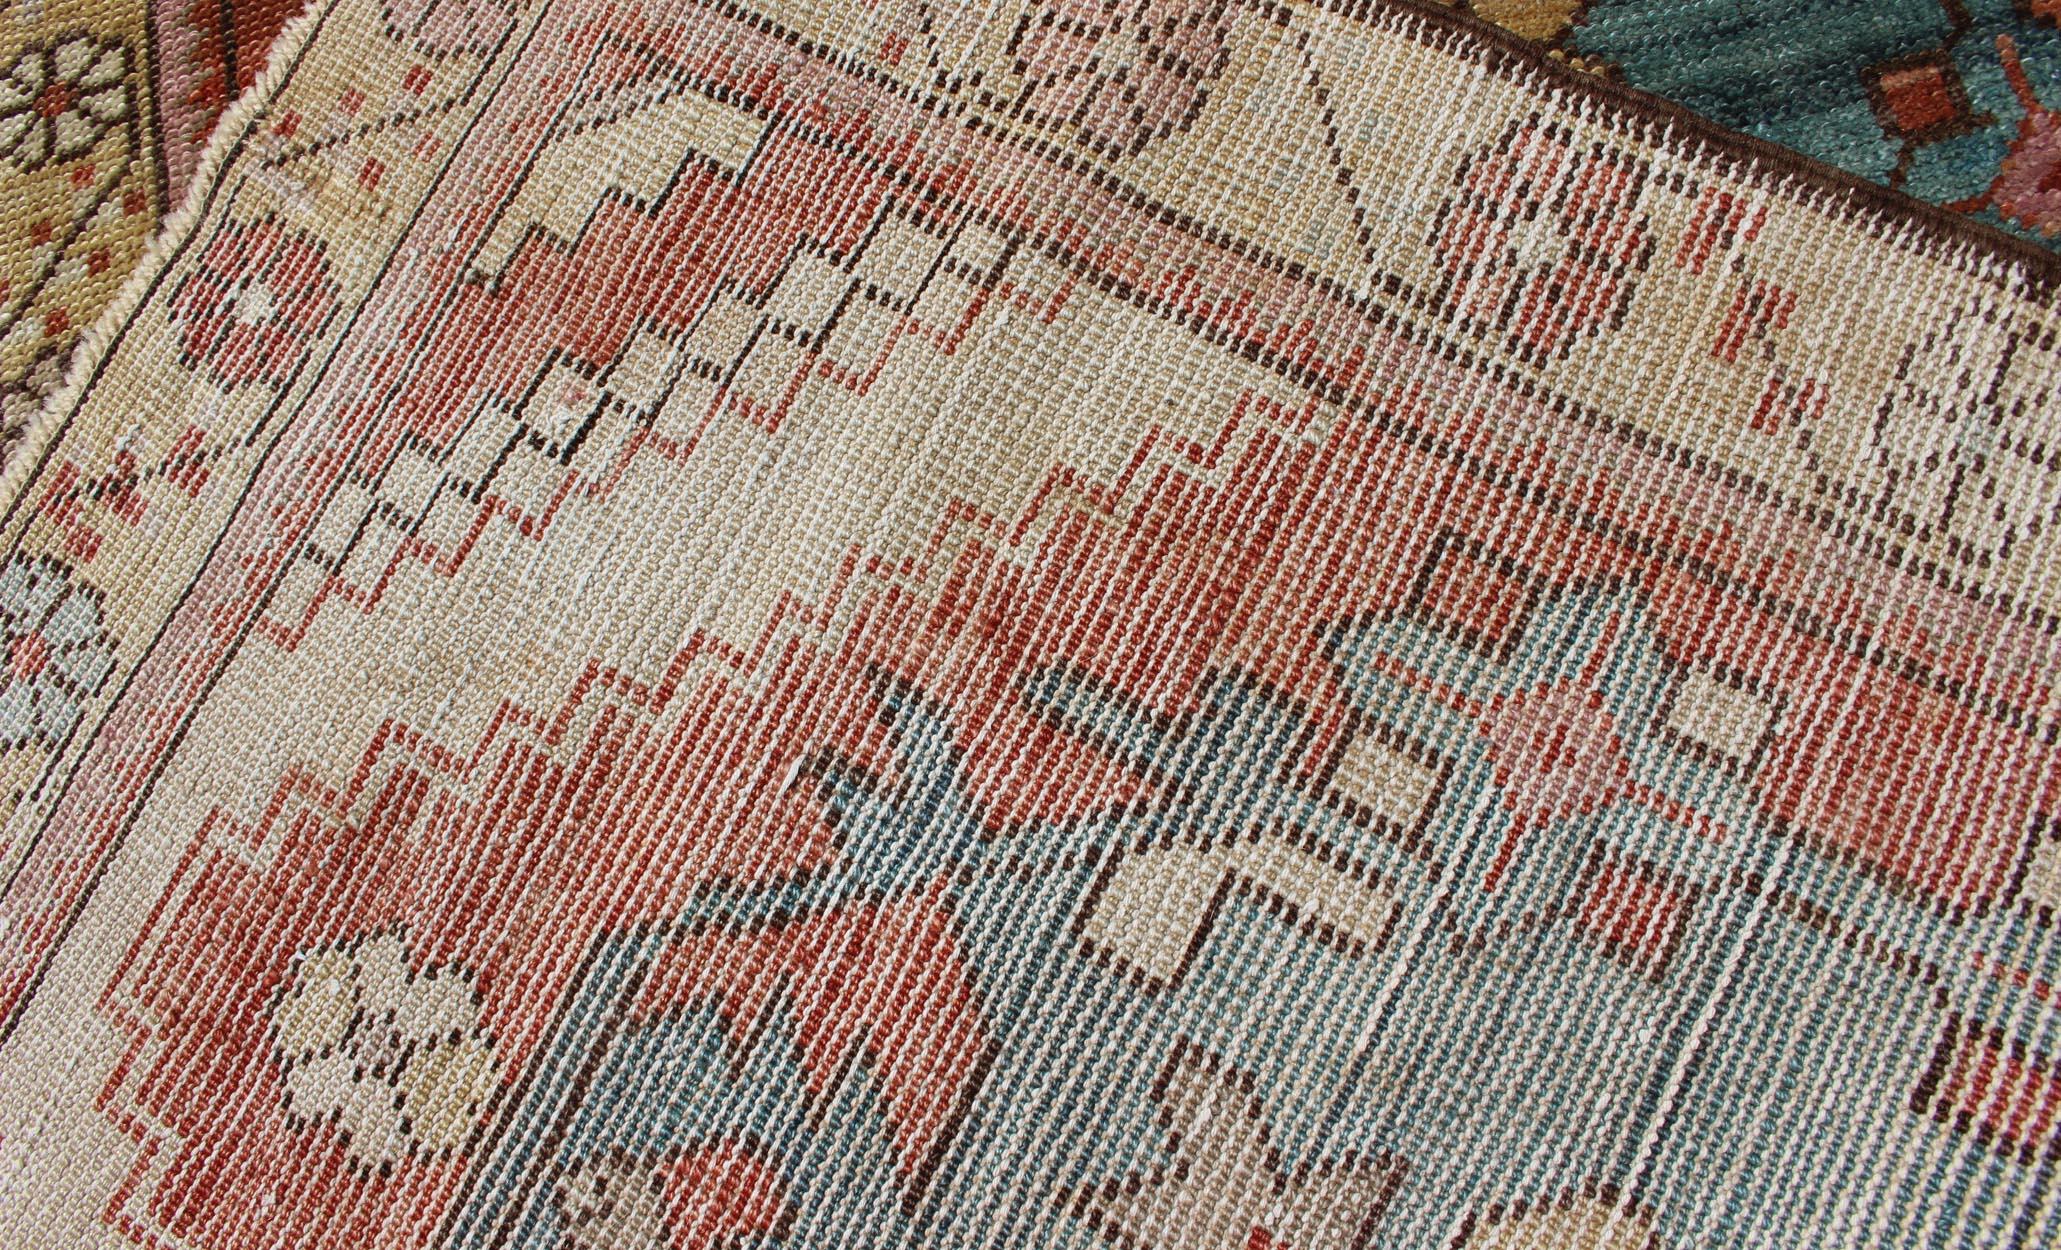 teal and terracotta rug